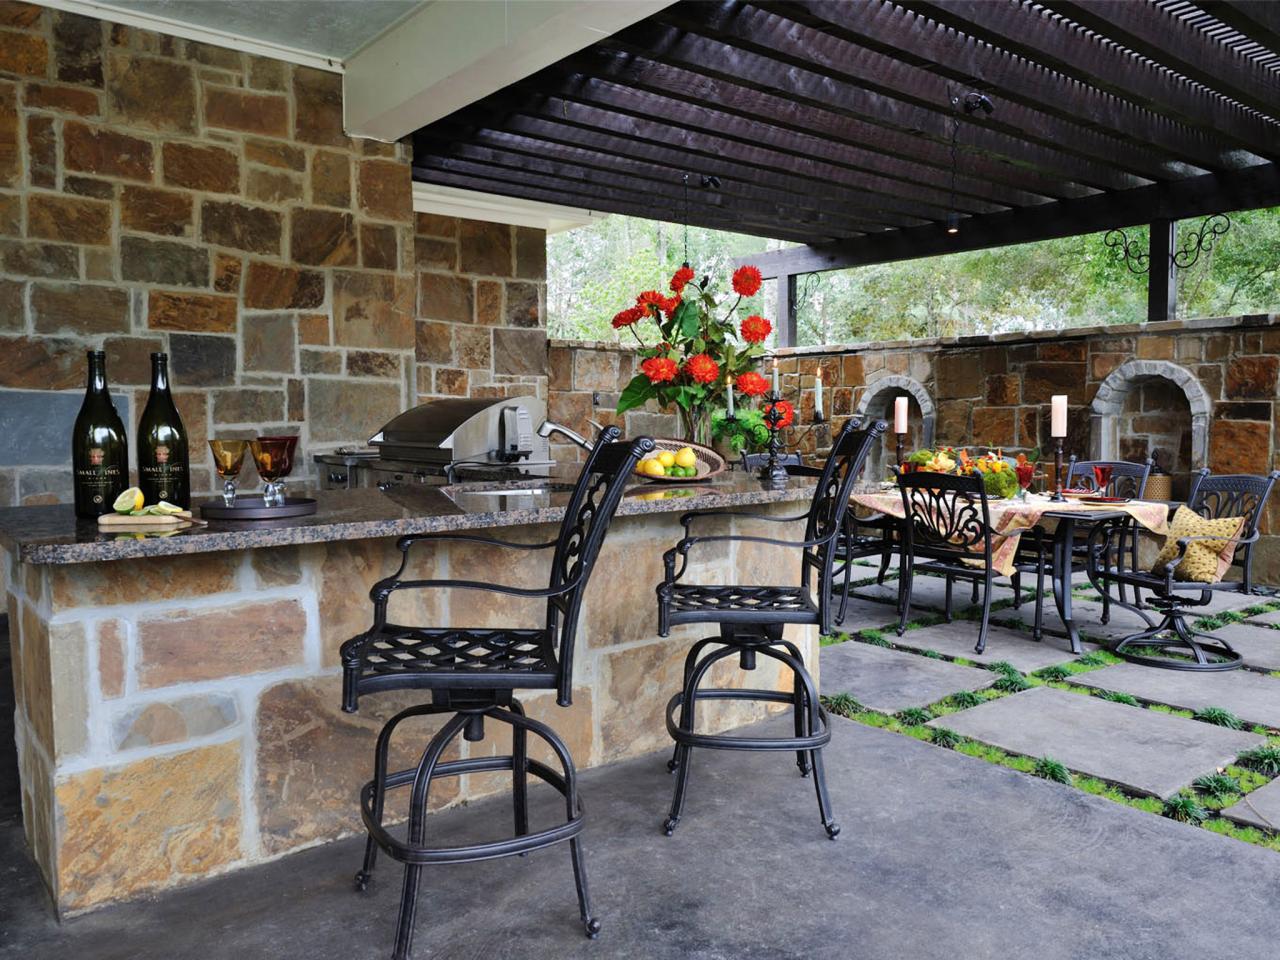 Building An Outdoor Kitchen Pictures Ideas From HGTV HGTV